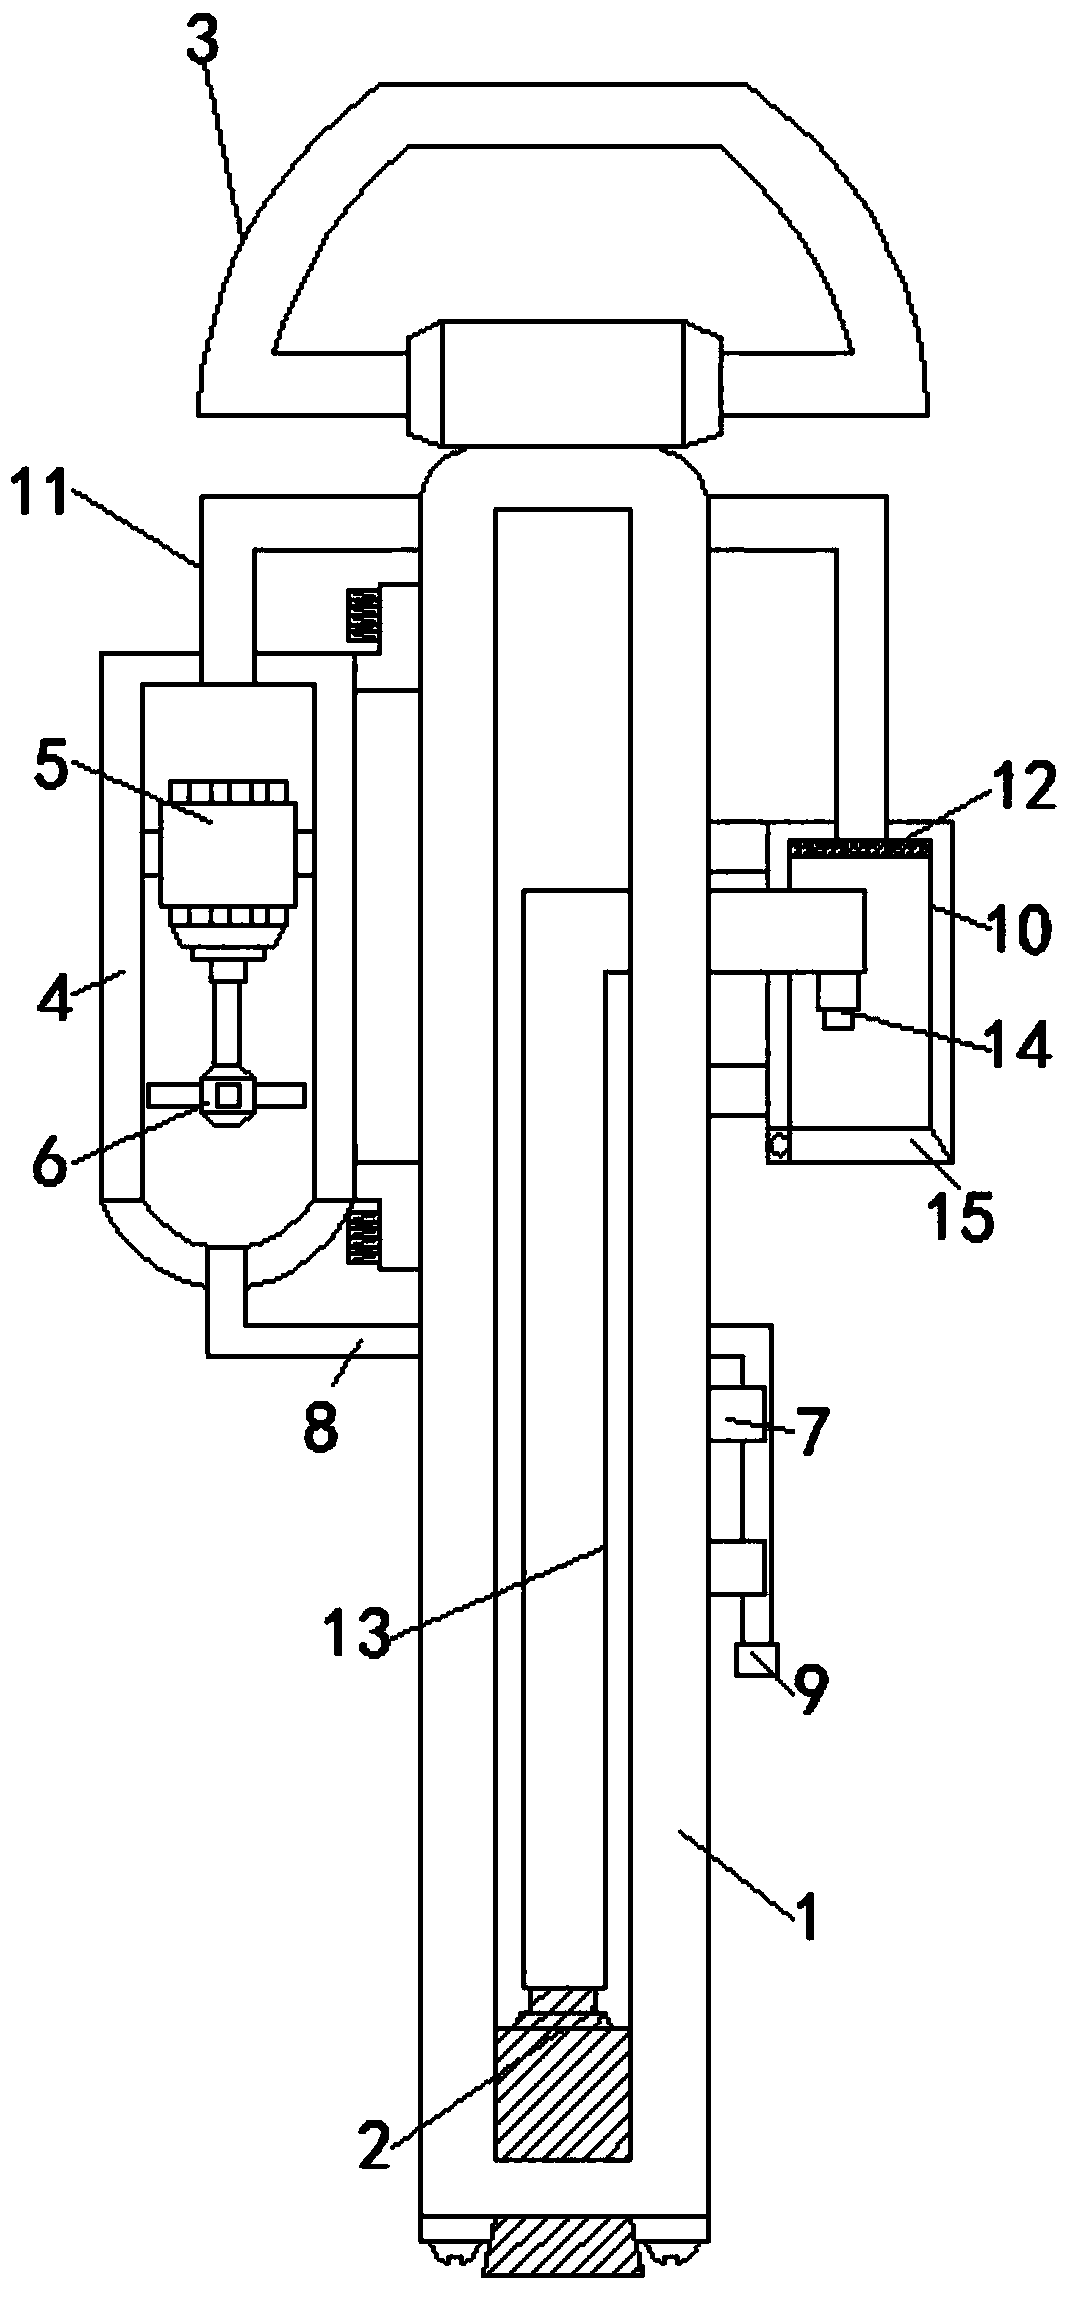 Boiler sampling device of coal-fired unit of thermal power plant